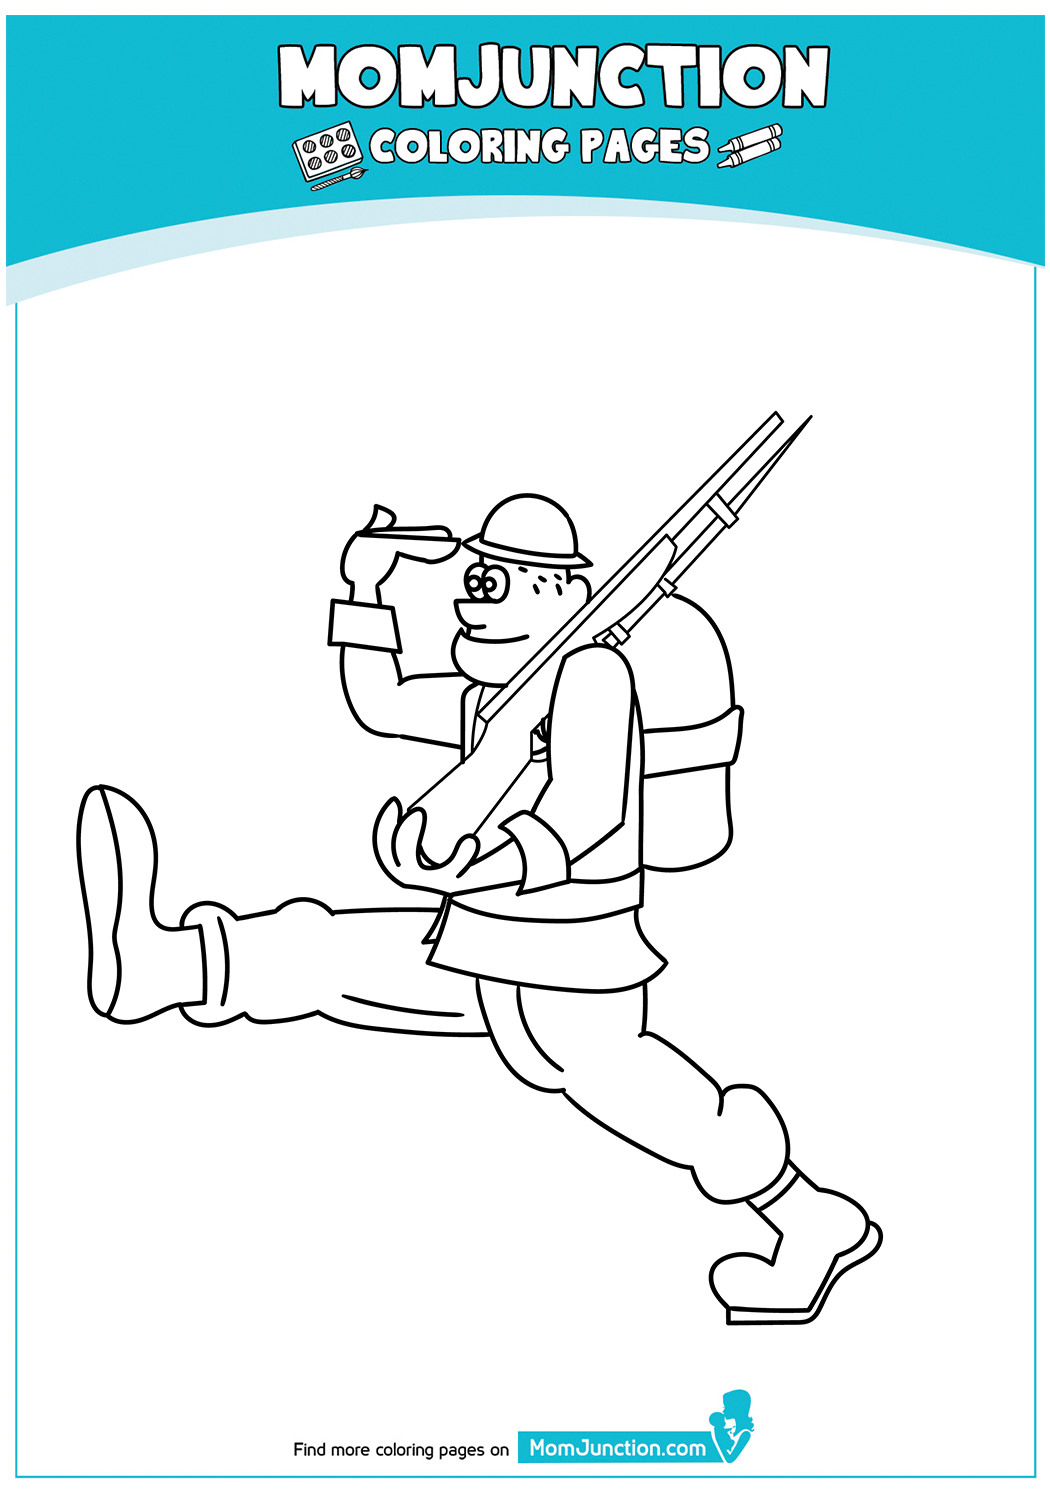 The-Toy-Soldier-Coloring-Page-17